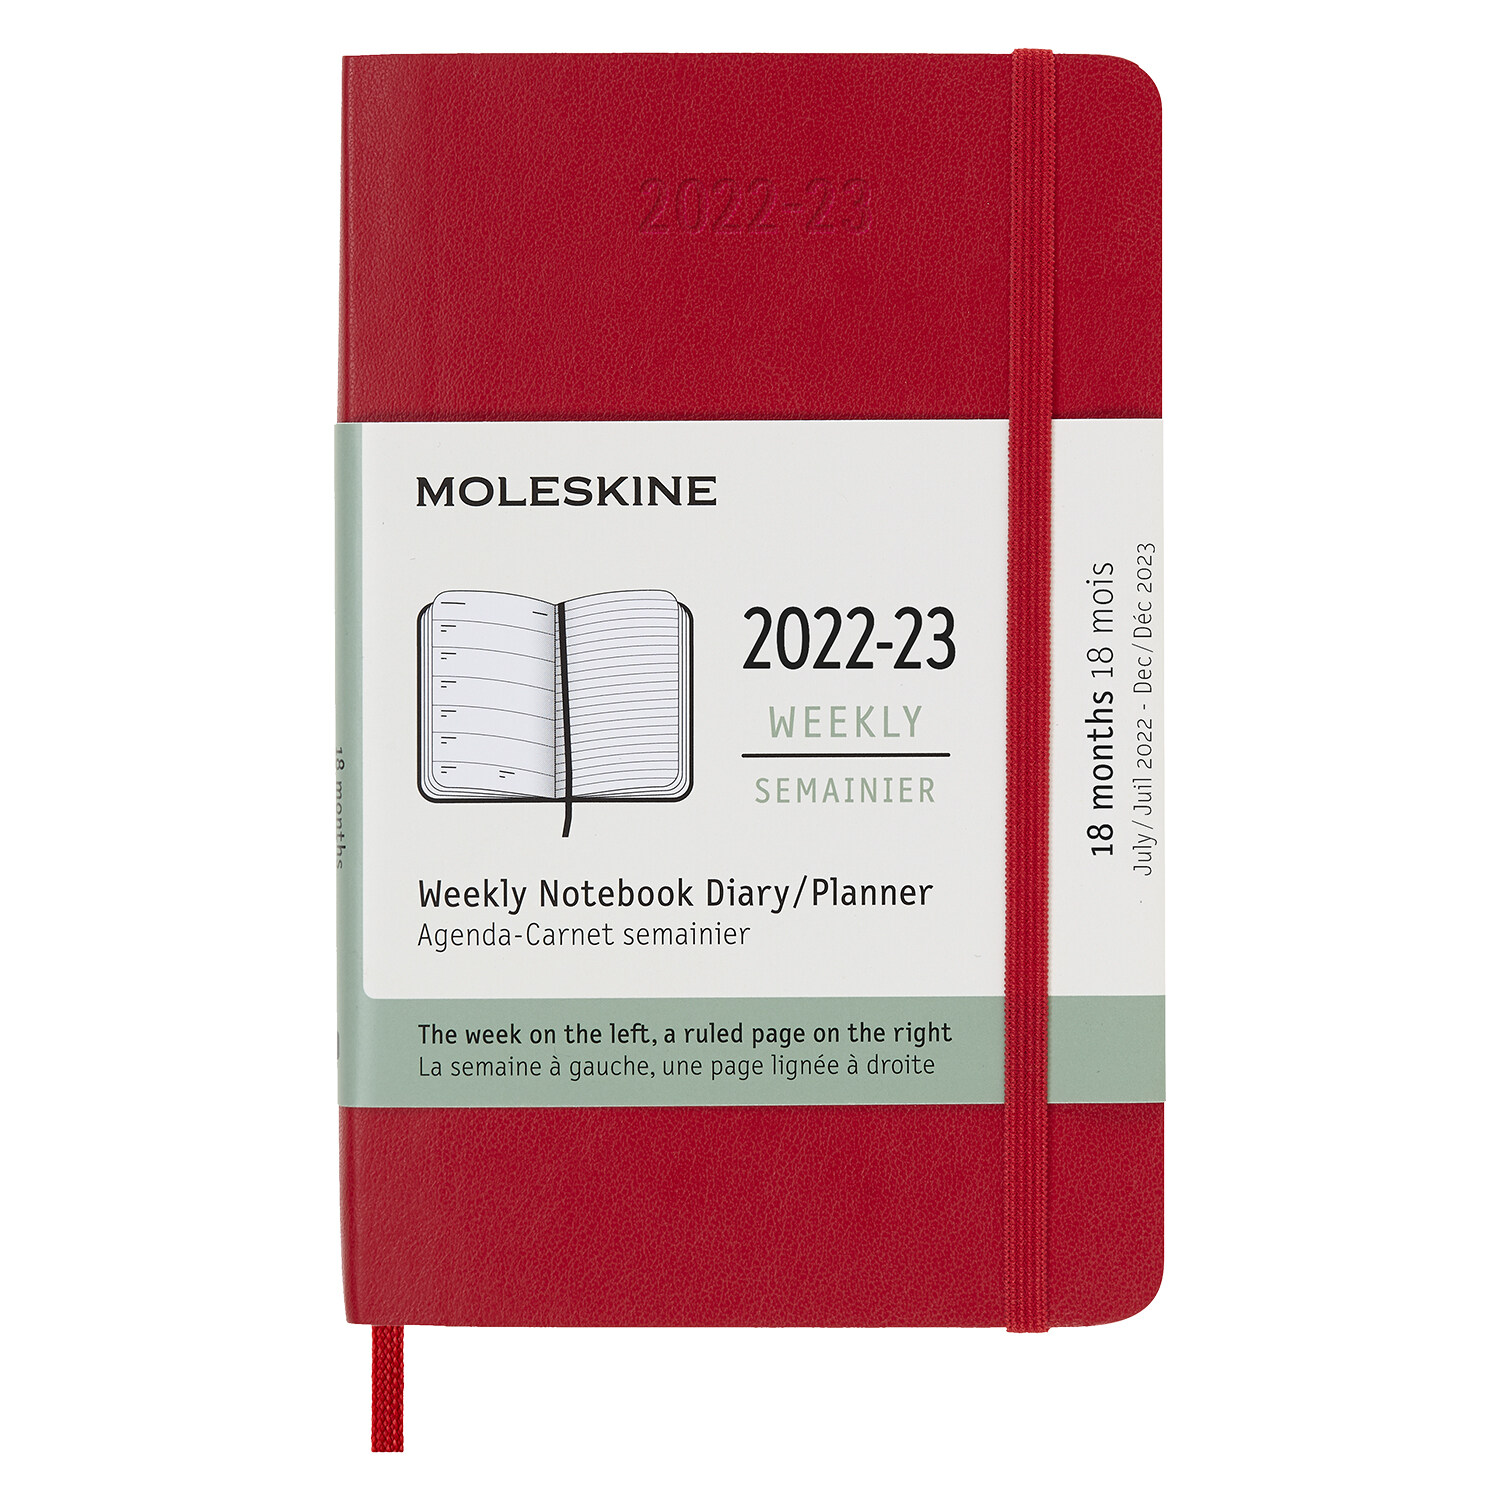 Moleskine 2023 Weekly Notebook Planner, 18m, Pocket, Scarlet Red, Soft Cover (3.5 X 5.5) (Other)